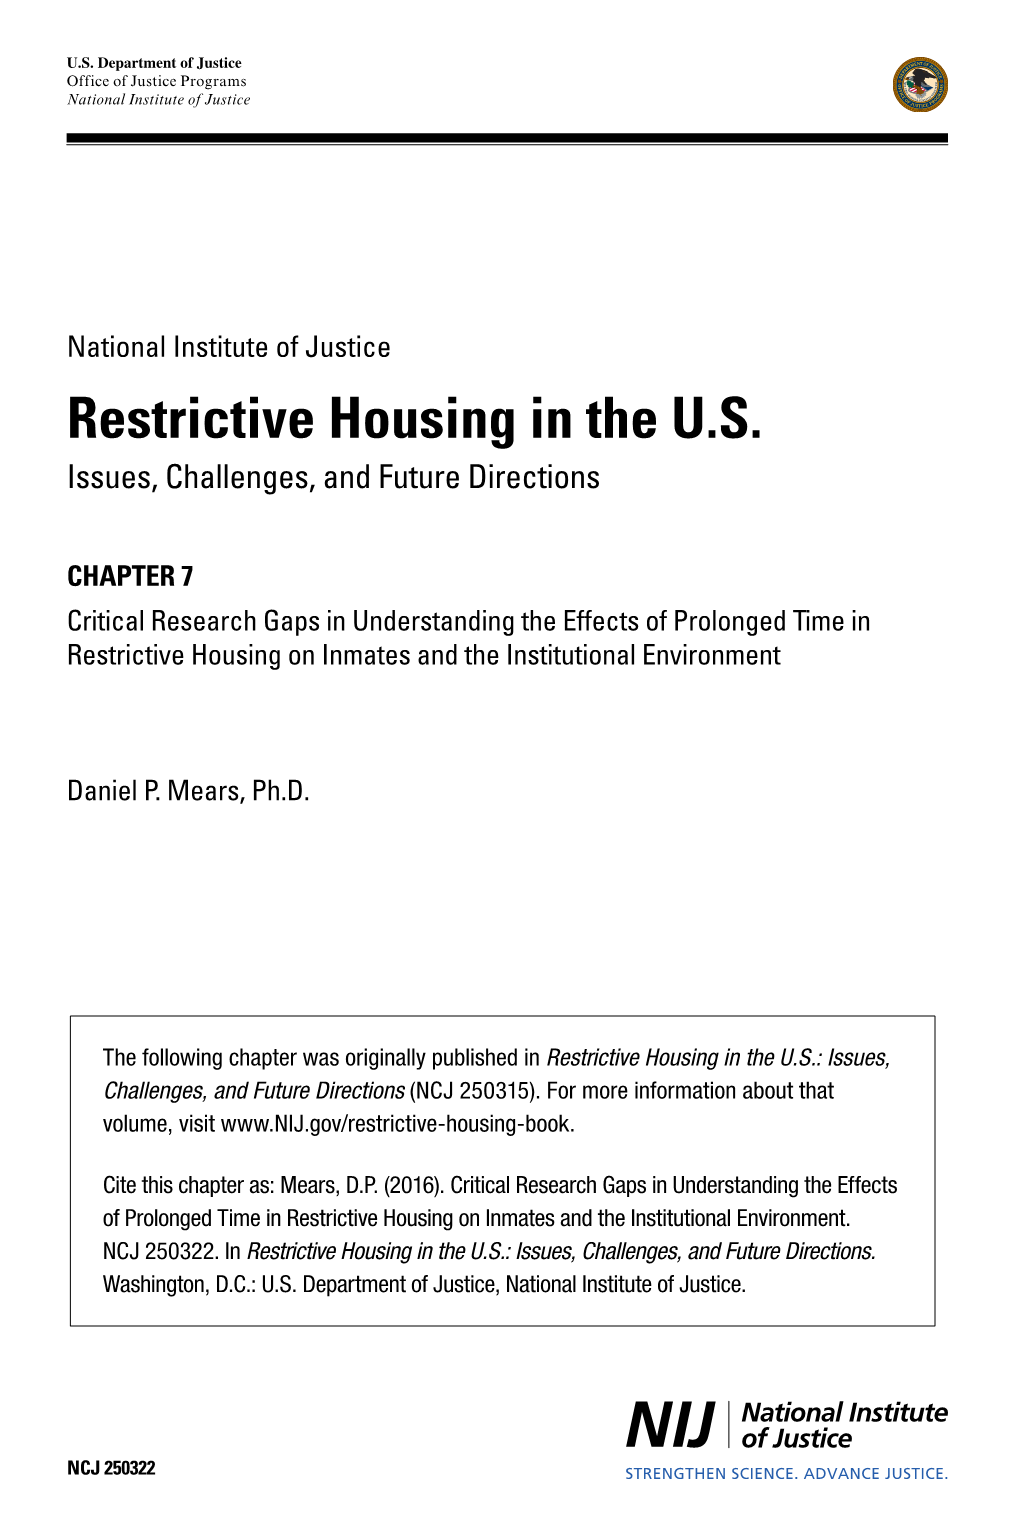 Restrictive Housing in the U.S.: Issues, Challenges, and Future Directions (NCJ 250315)